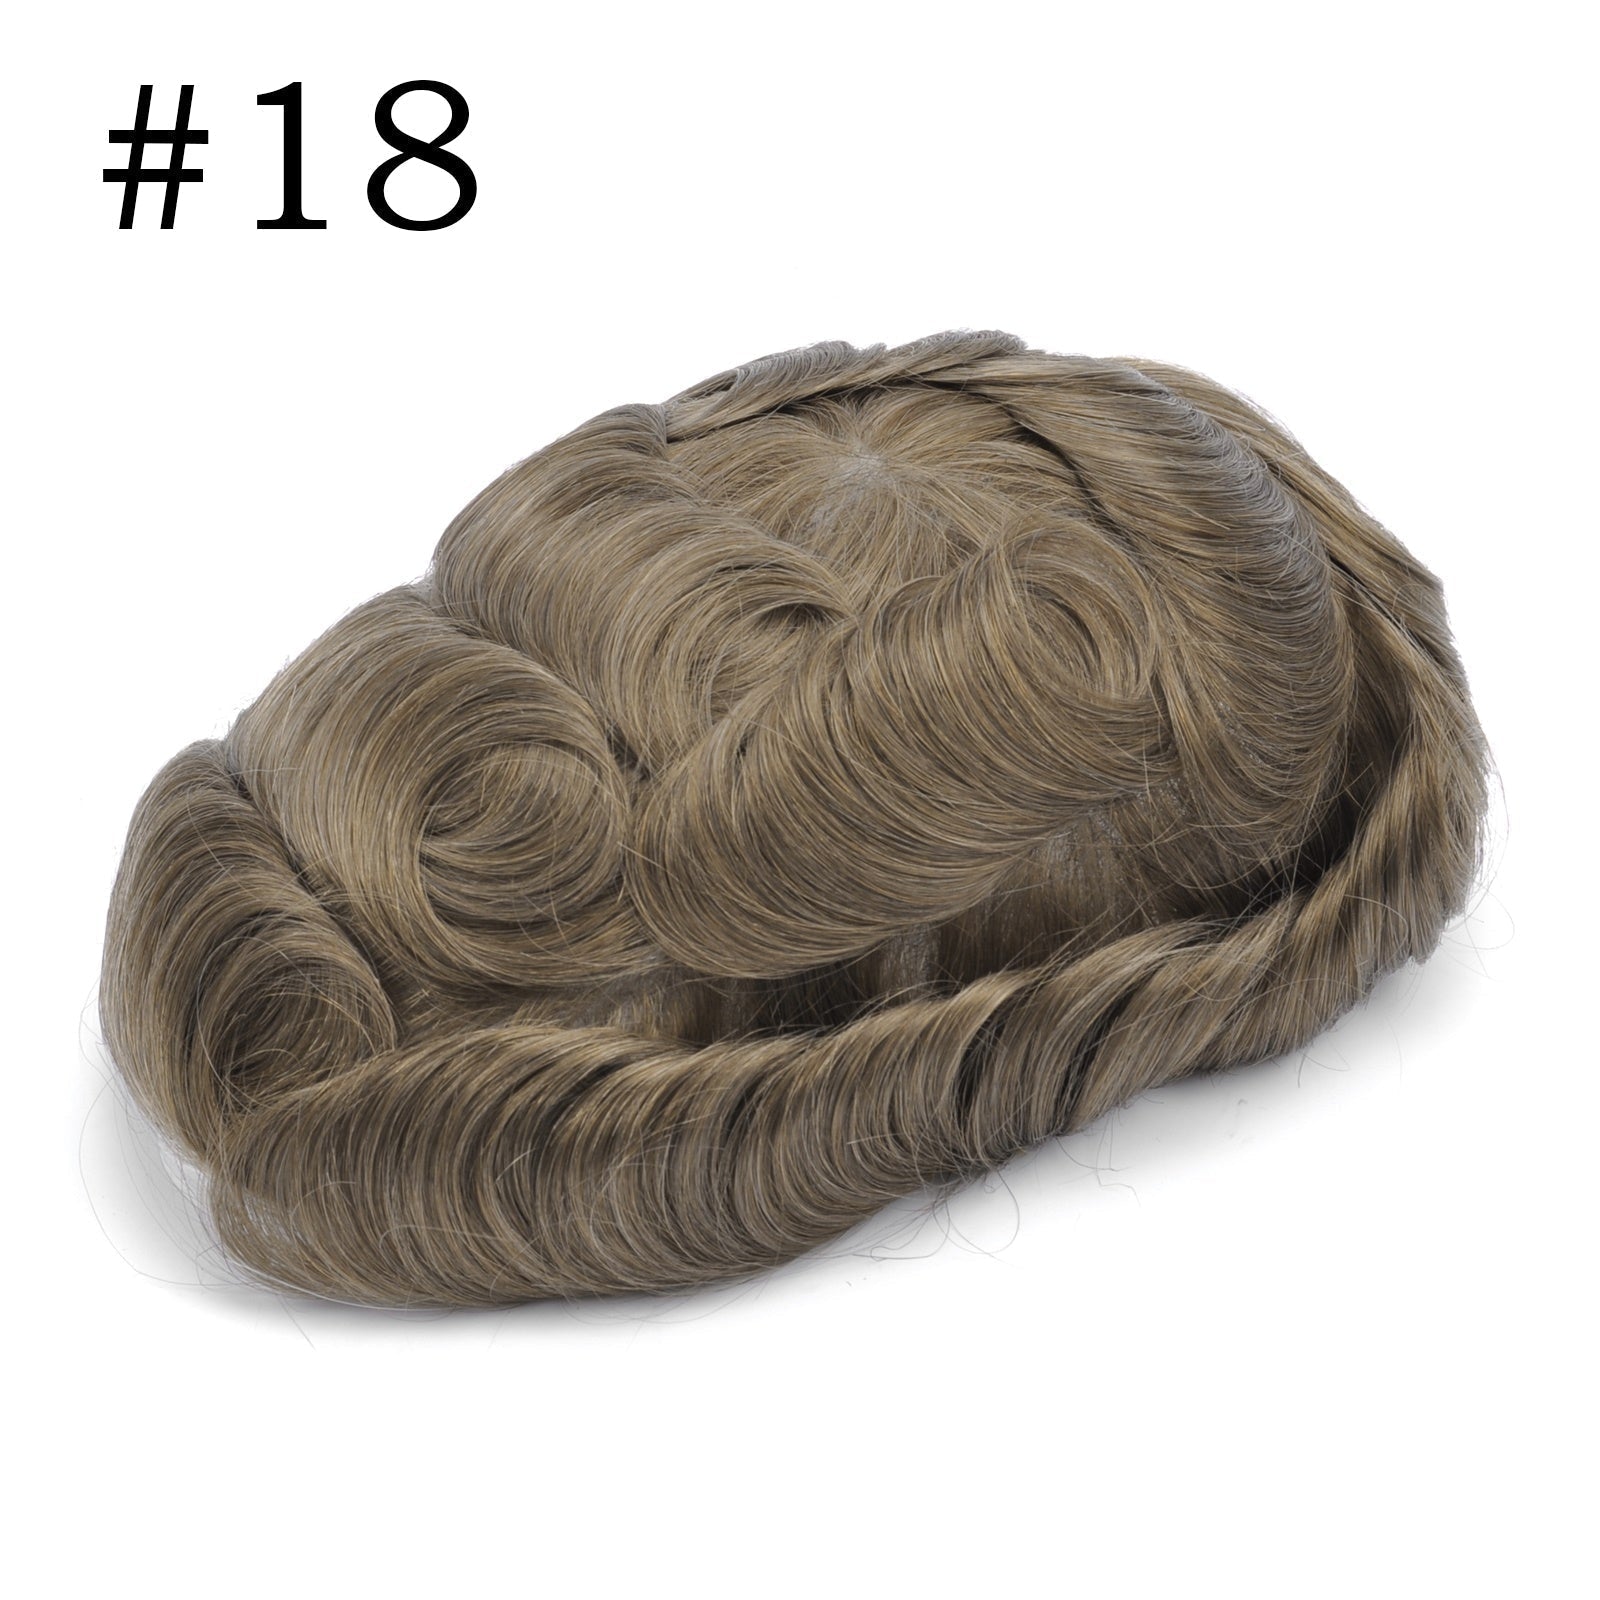 GEXWIGS 0.1-0.12mm Thin Skin Toupee Durable Scalloped Front | SKIN.